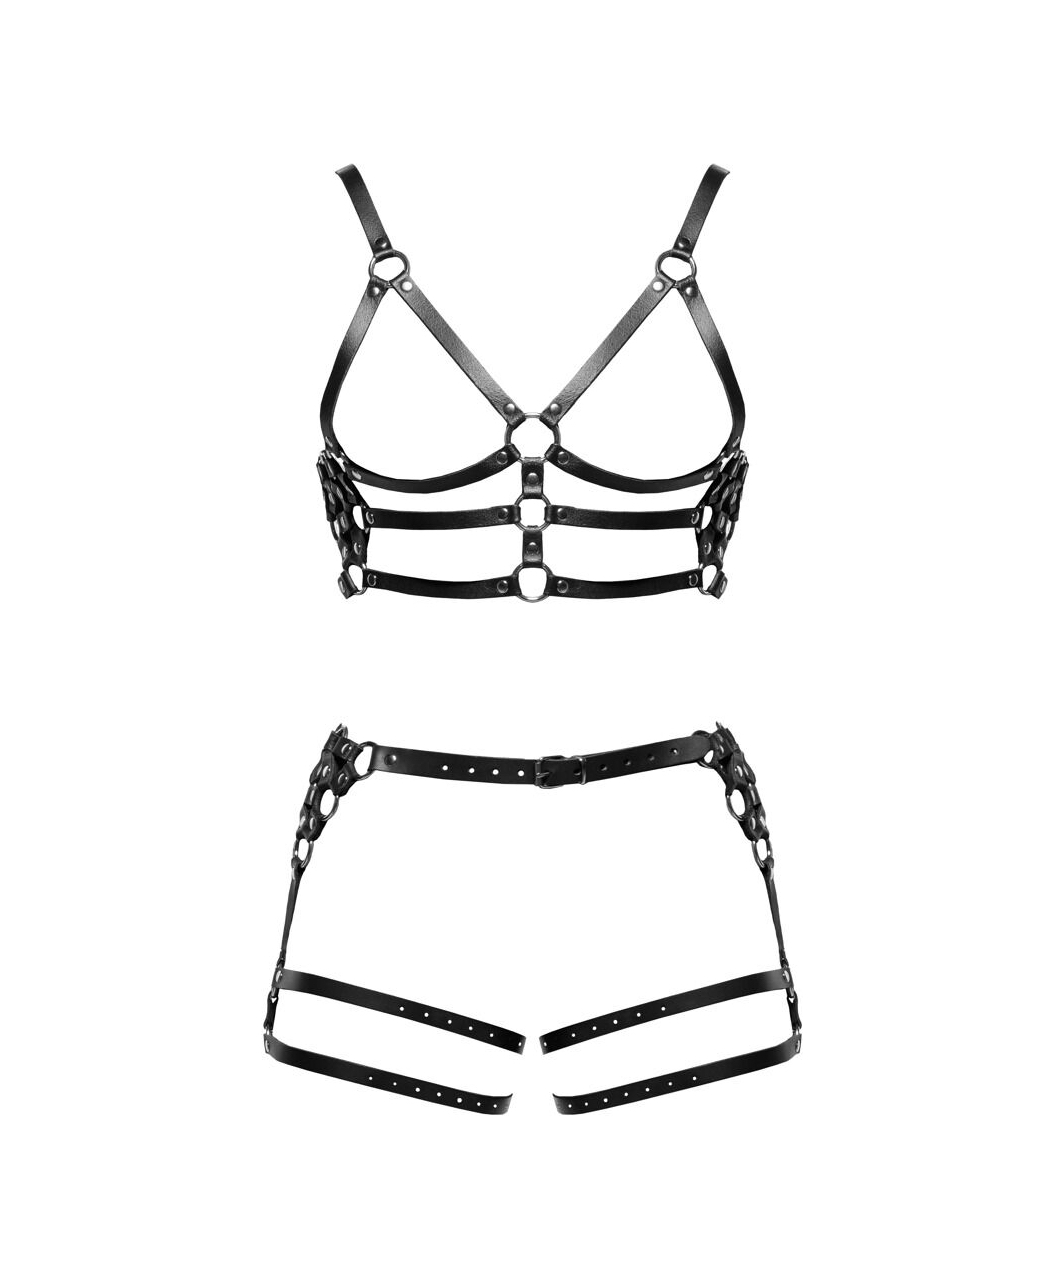 Zado leather suspender harness two-piece set